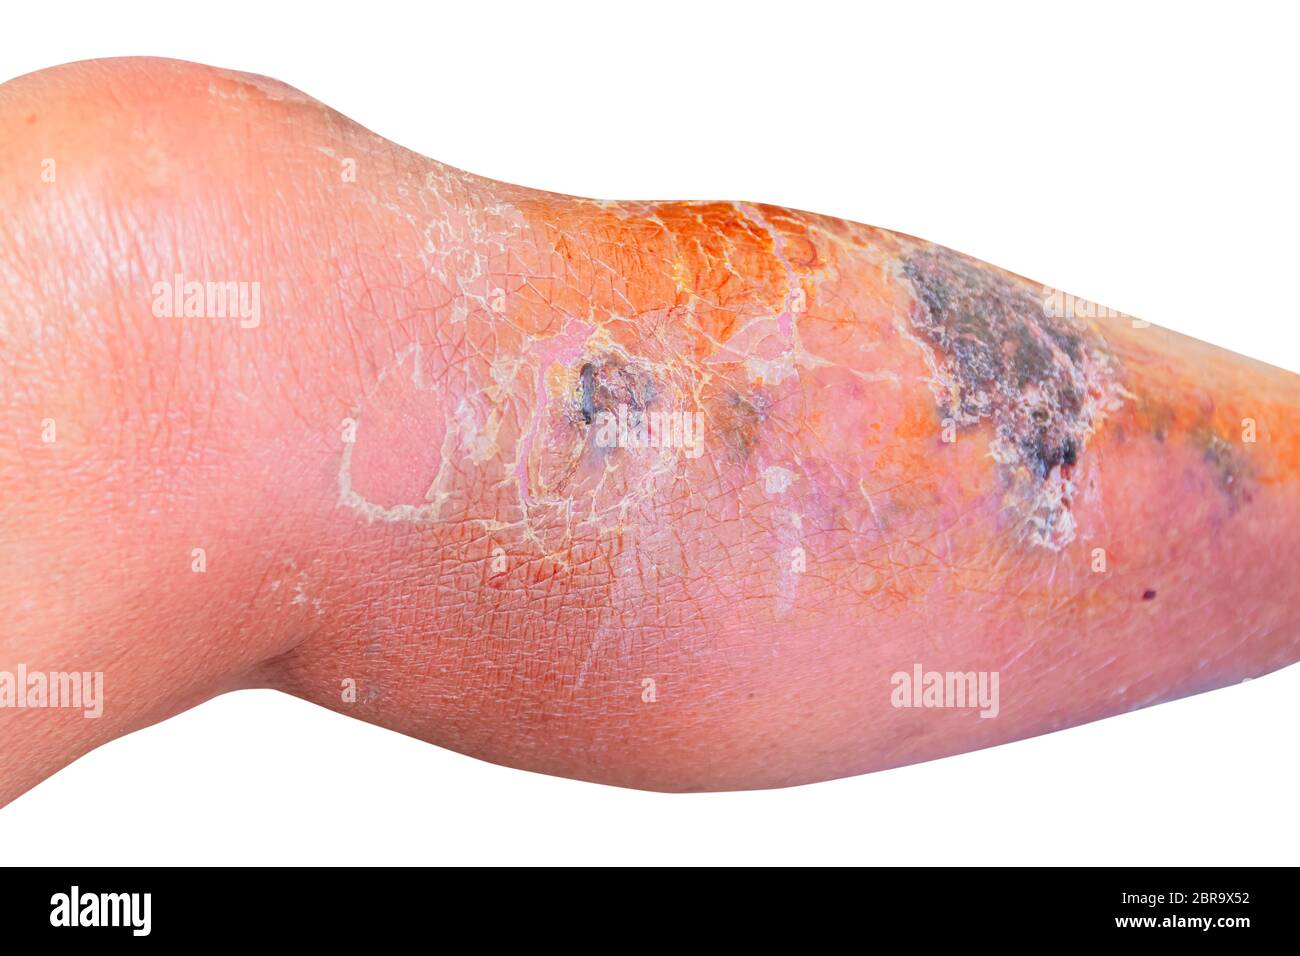 Erysipelas bacterial infection Under the skin leg aged people On  white background Stock Photo